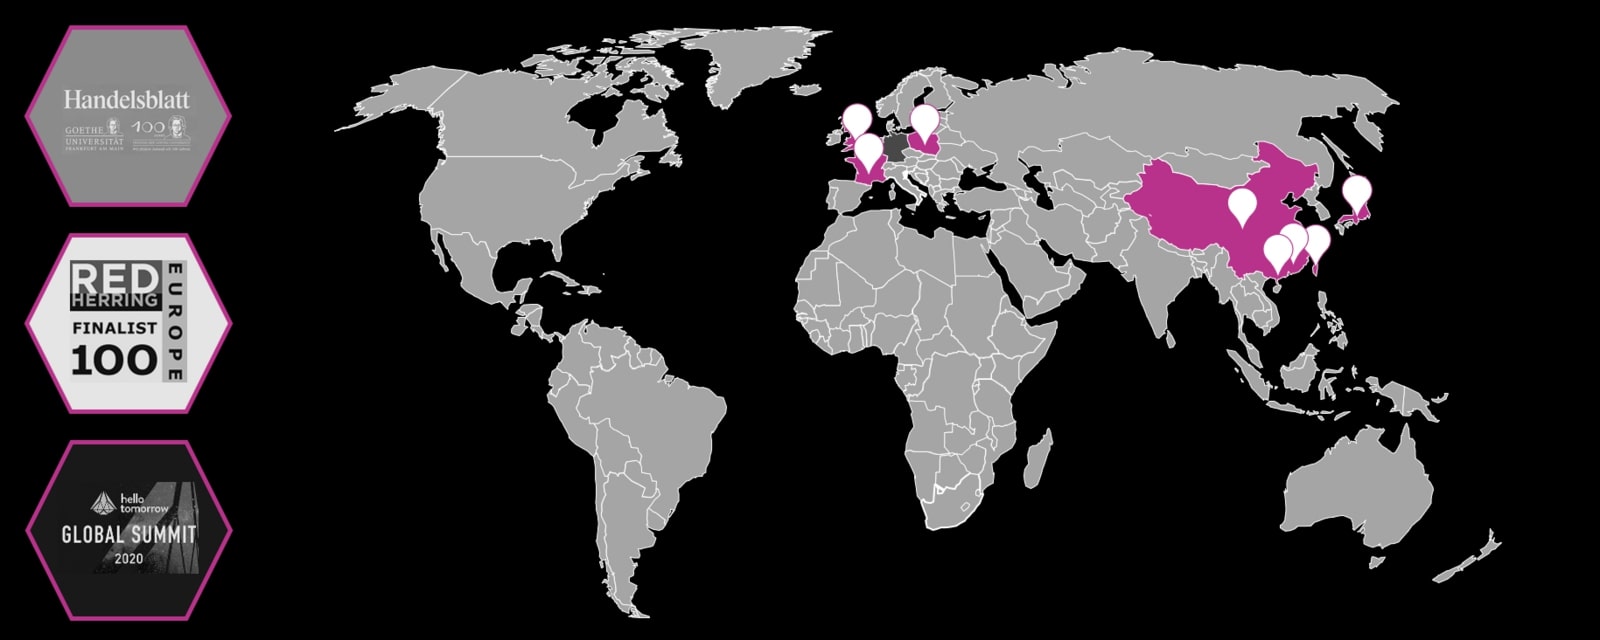 World map with eight highlighted countries and the logos of three prizes (Handelsblatt, Red Herring, Global Summit) showing the Plasmion development story